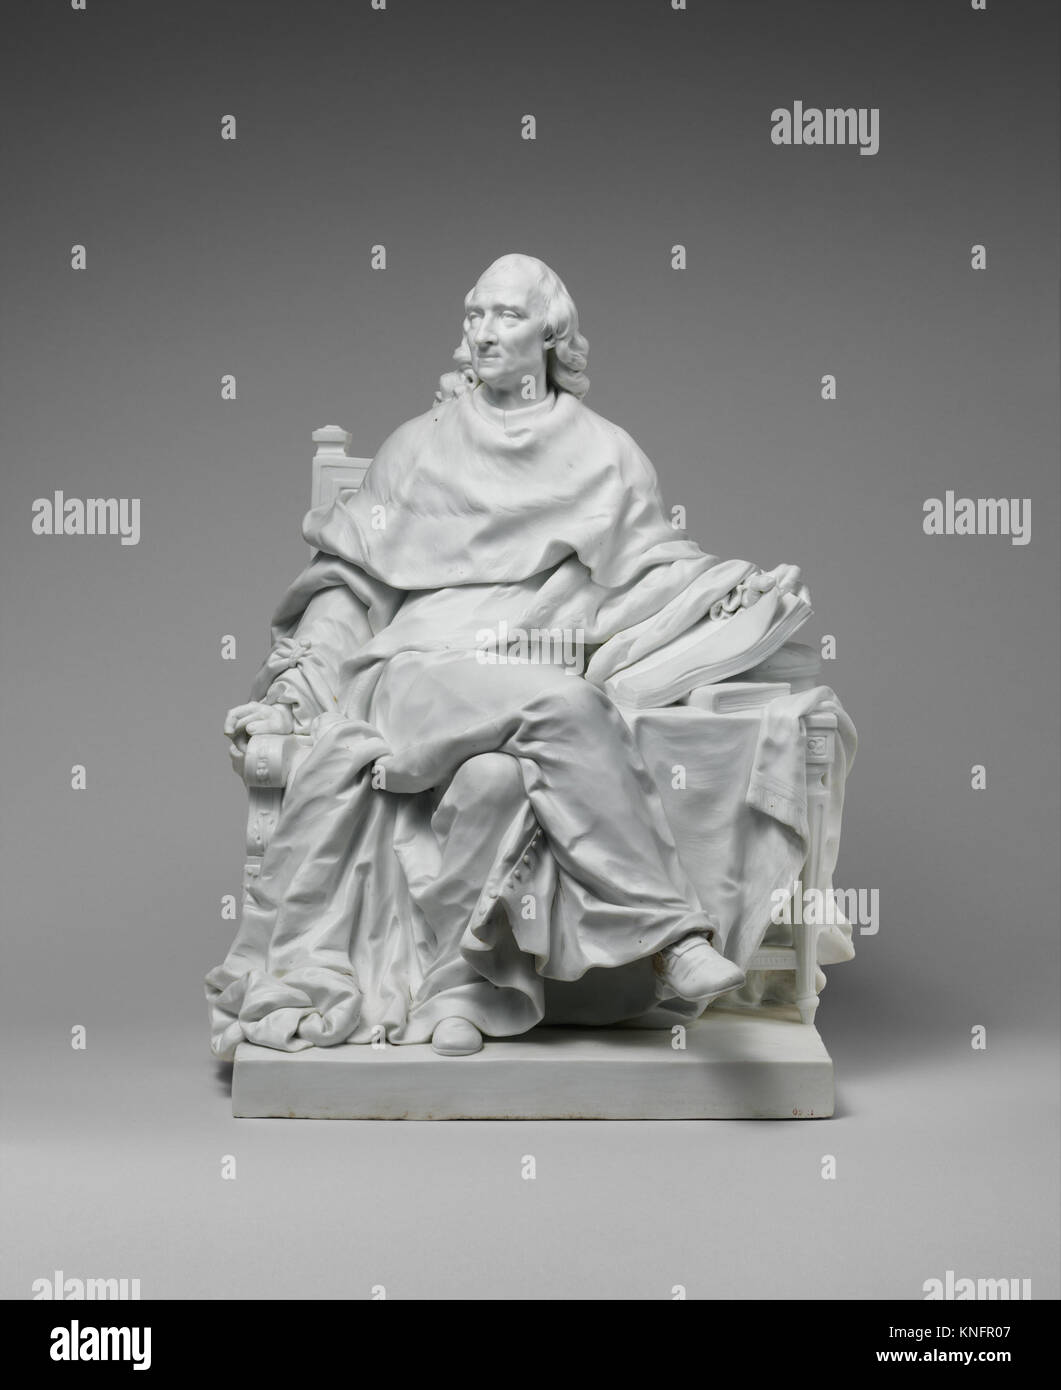 Charles de Secondat, Baron de Montesquieu (1689 1755) MET DP156480 188928 Manufactory: S?vres Manufactory, French, 1740?present, Modeler: After a model by Clodion (Claude Michel), French, Nancy 1738?1814 Paris, Charles de Secondat, Baron de Montesquieu (1689?1755), ca. 1784, Hard-paste biscuit porcelain, Overall (confirmed): 14 x 11 1/4 x 10 5/16 in. (35.6 x 28.6 x 26.2 cm); Base: 9 9/16 x 8 3/4 in. (24.3 x 22.2 cm). The Metropolitan Museum of Art, New York. Gift of John A. Rutherfurd, 1905 (05.11) Stock Photo